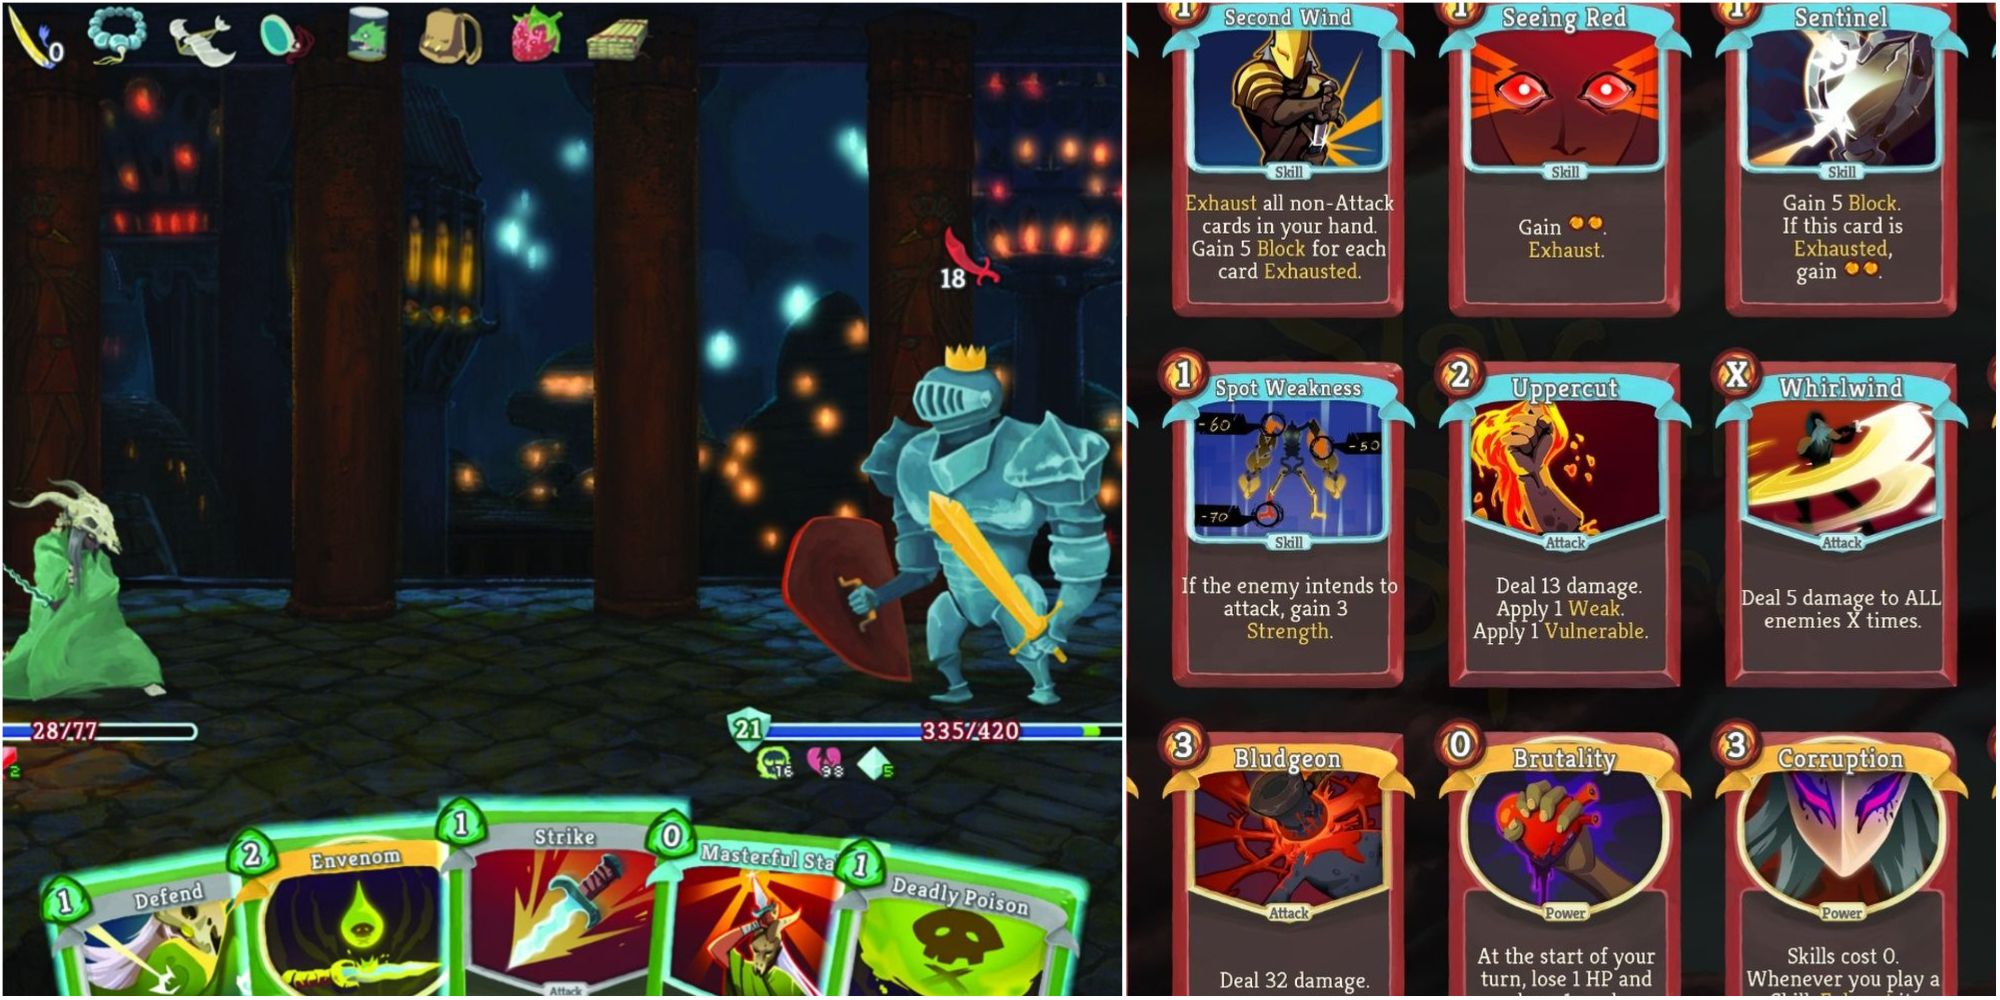 Screenshots of card decks and gameplay from Slay the Spire.